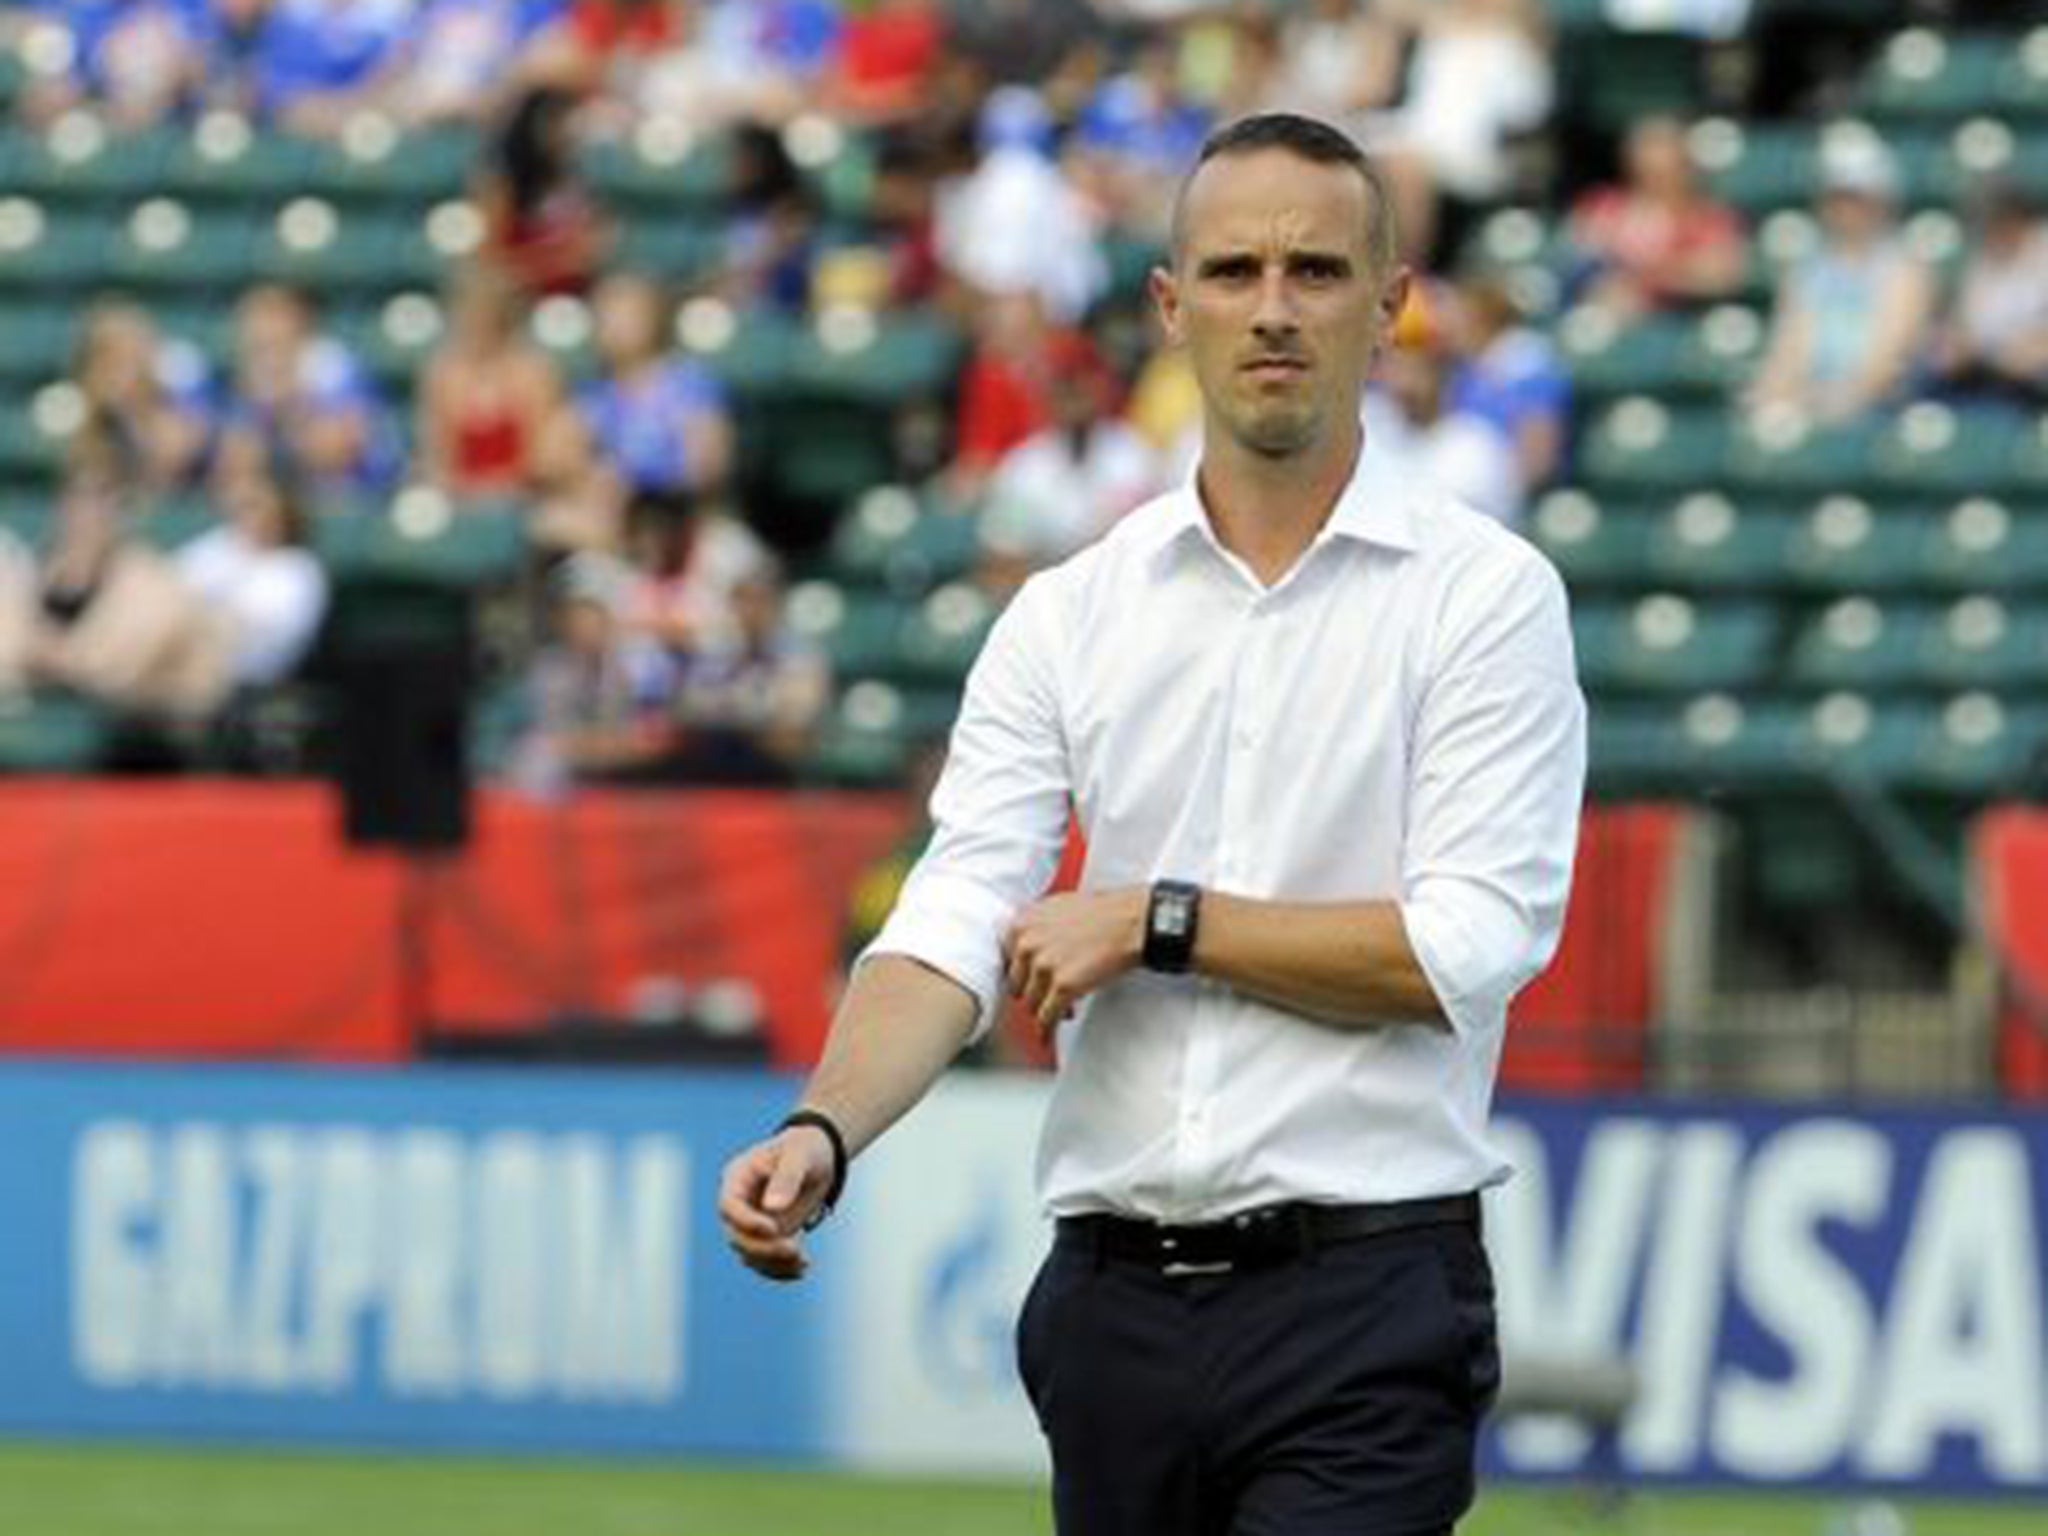 Mark Sampson, the England manager, fully backed his team